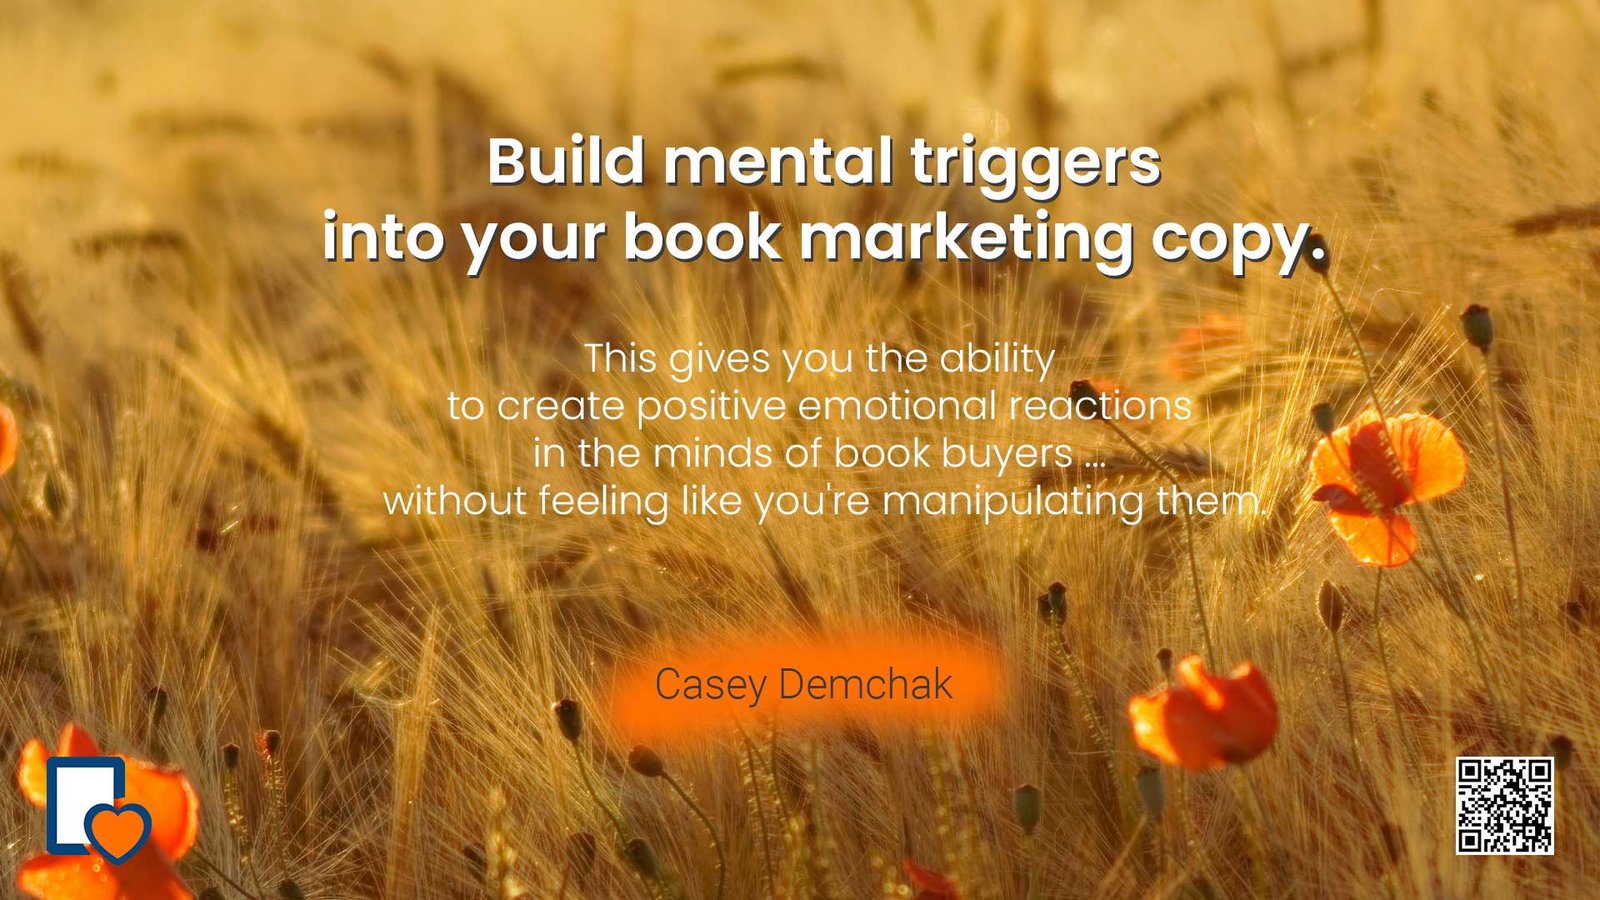 Build mental triggers into your book marketing copy. -Casey Demchak